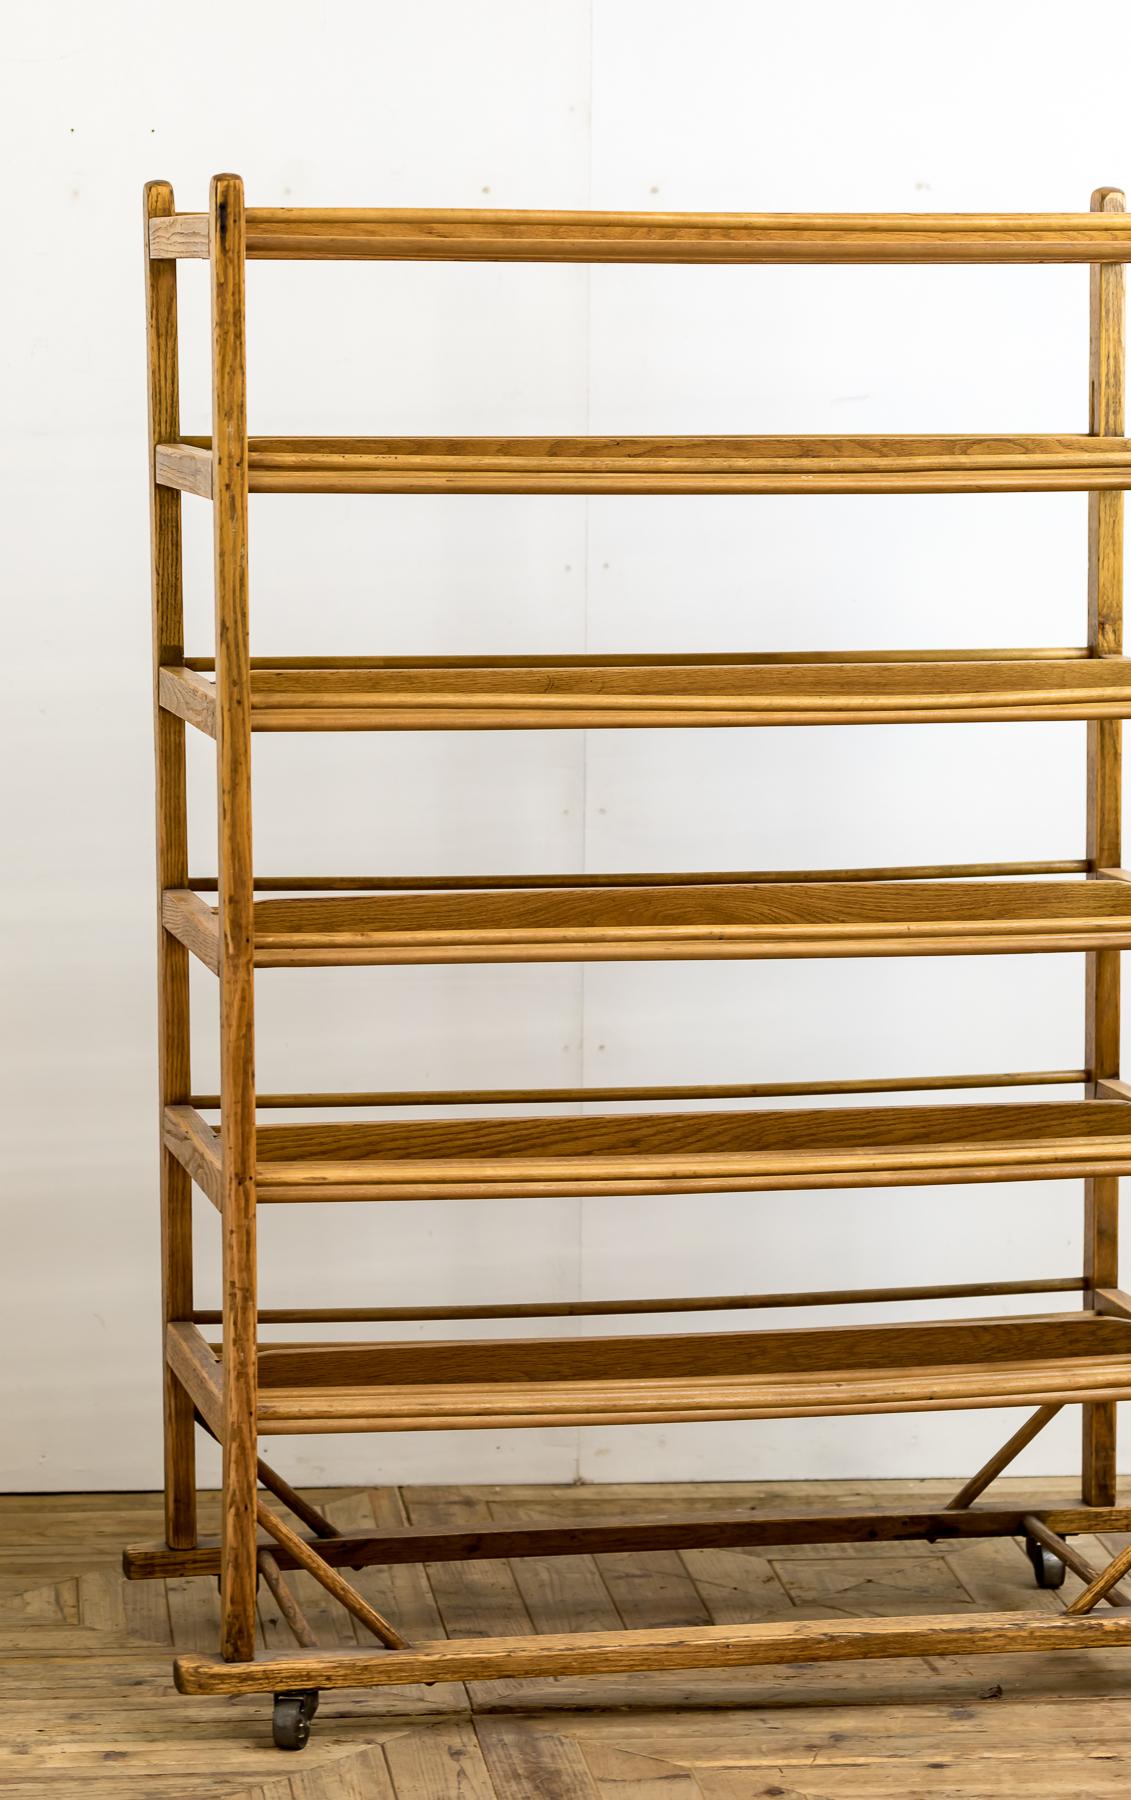 An Industrial bakery cooling rack of traditional form on six tiers and raised on industrial casters.